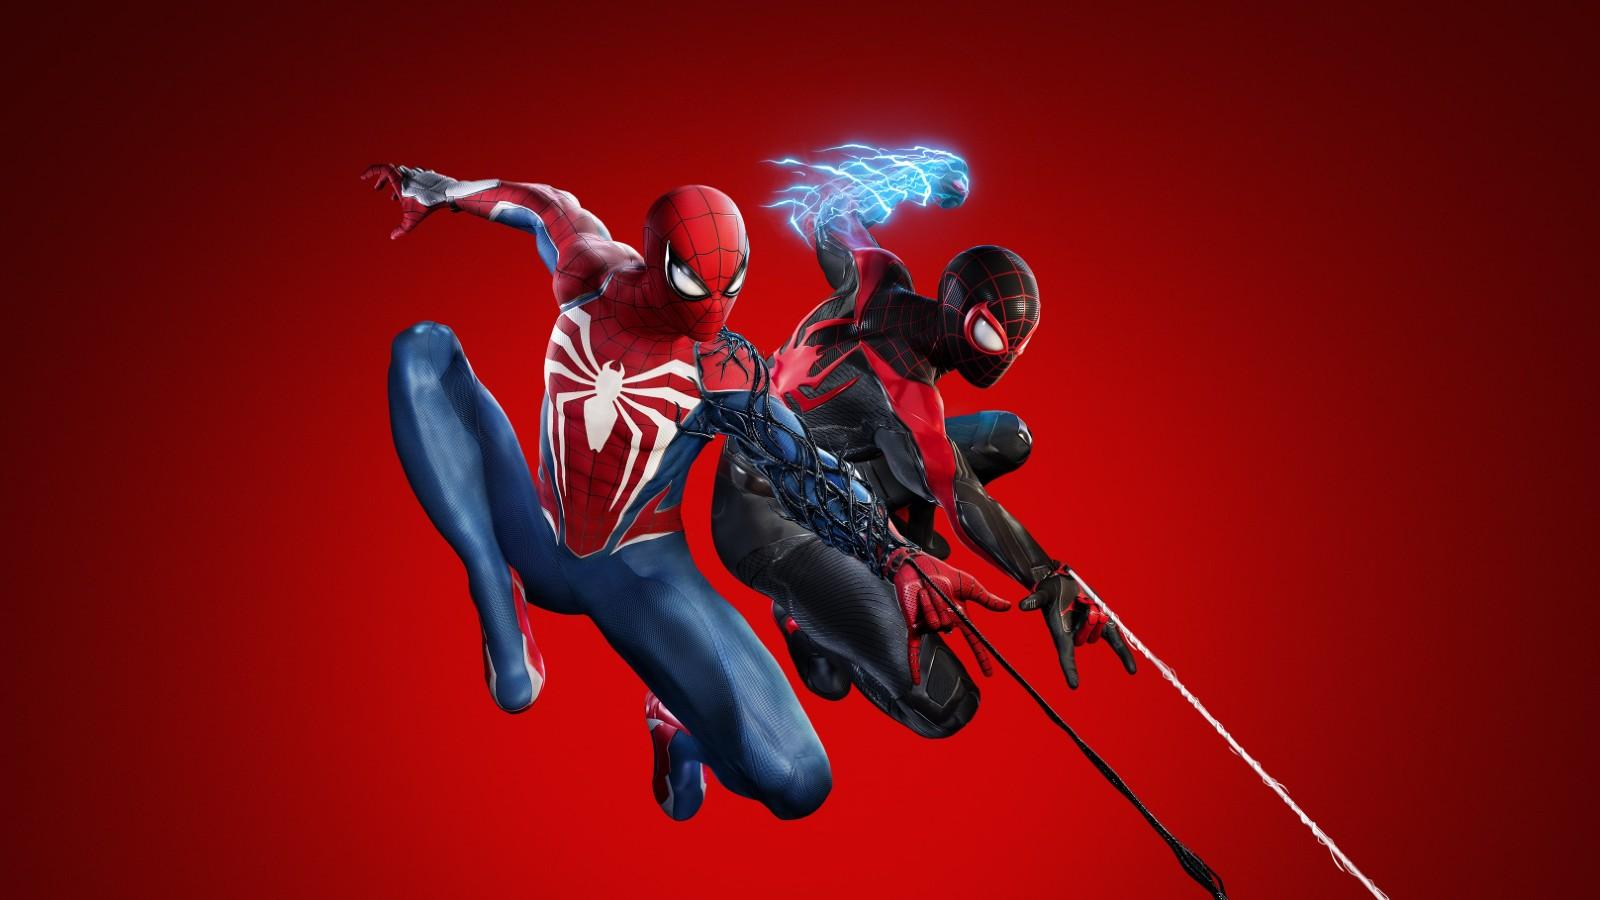 The official artwork for Marvel's Spider-Man featuring Peter Parker and Miles Morales.